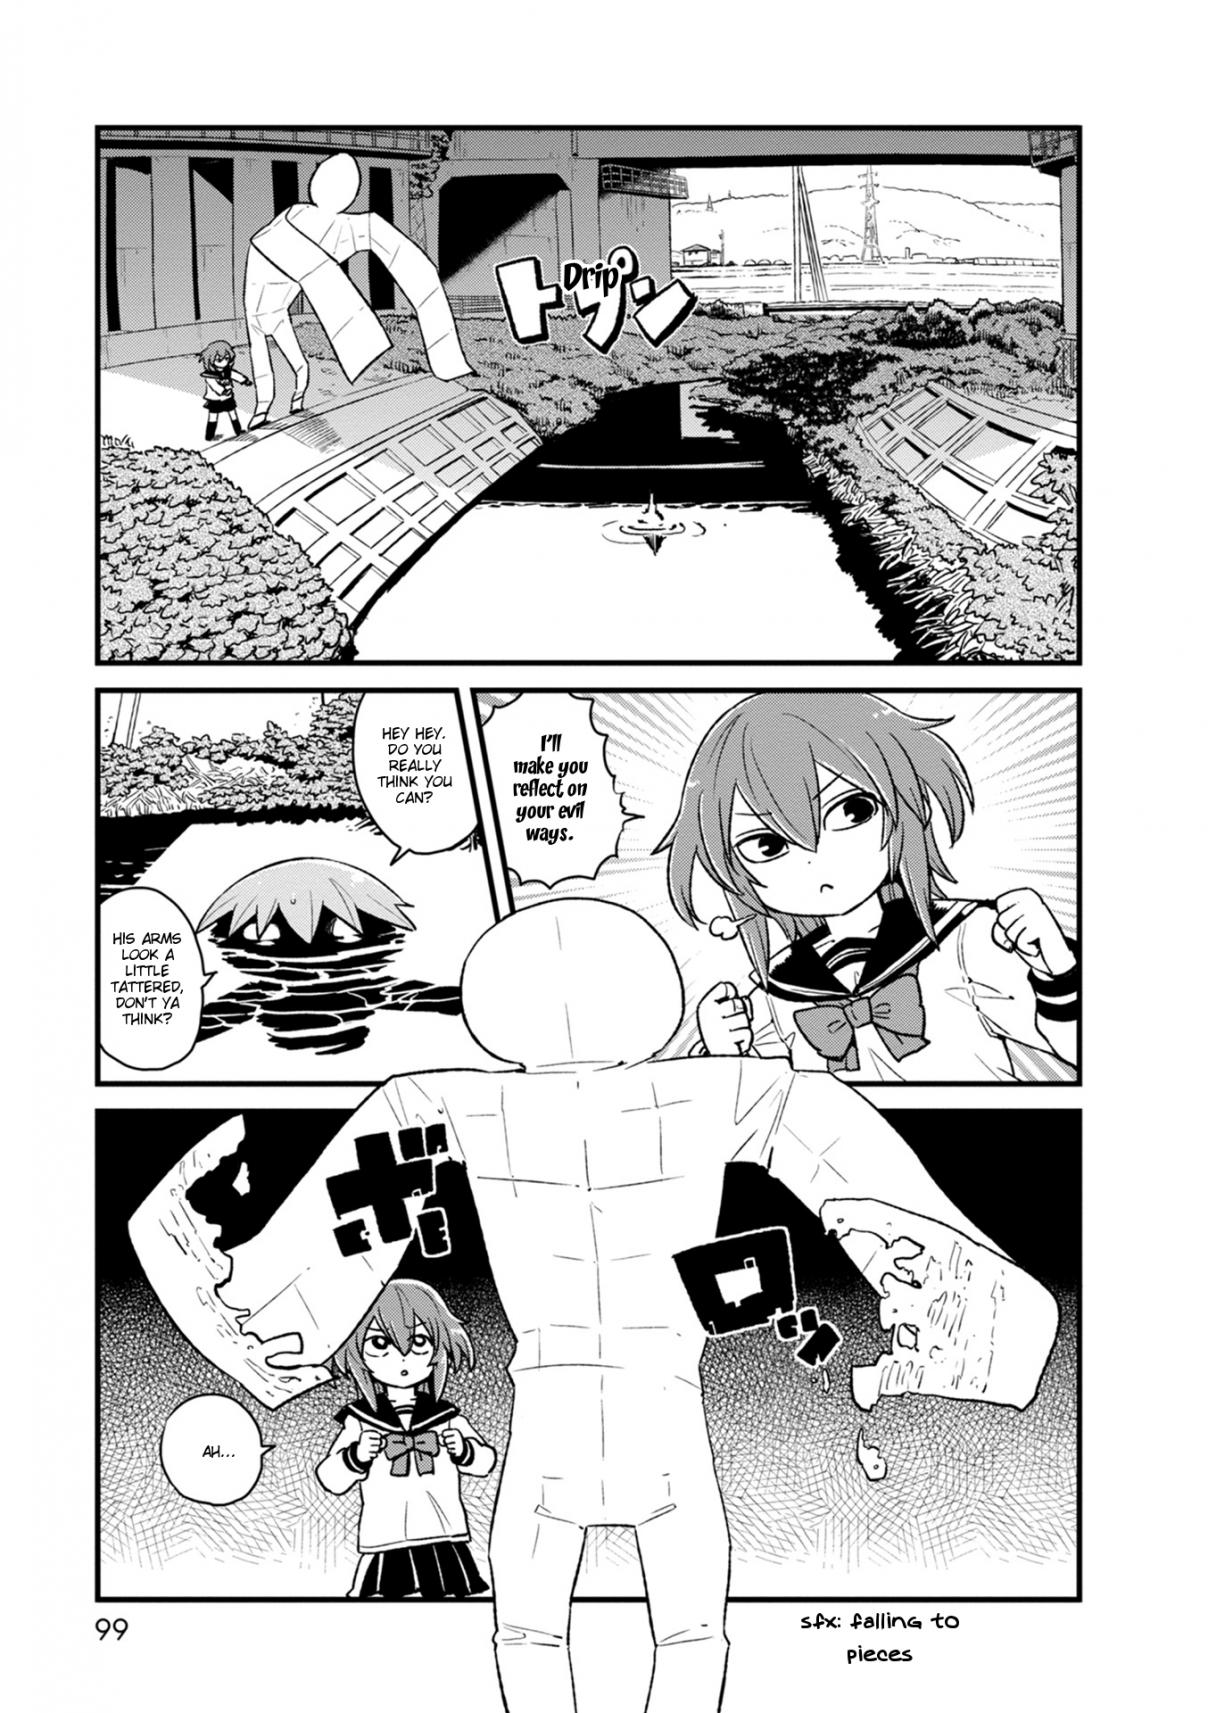 Neko Musume Michikusa Nikki Vol. 15 Ch. 90 Passing the Time Chasing After a Frog Person